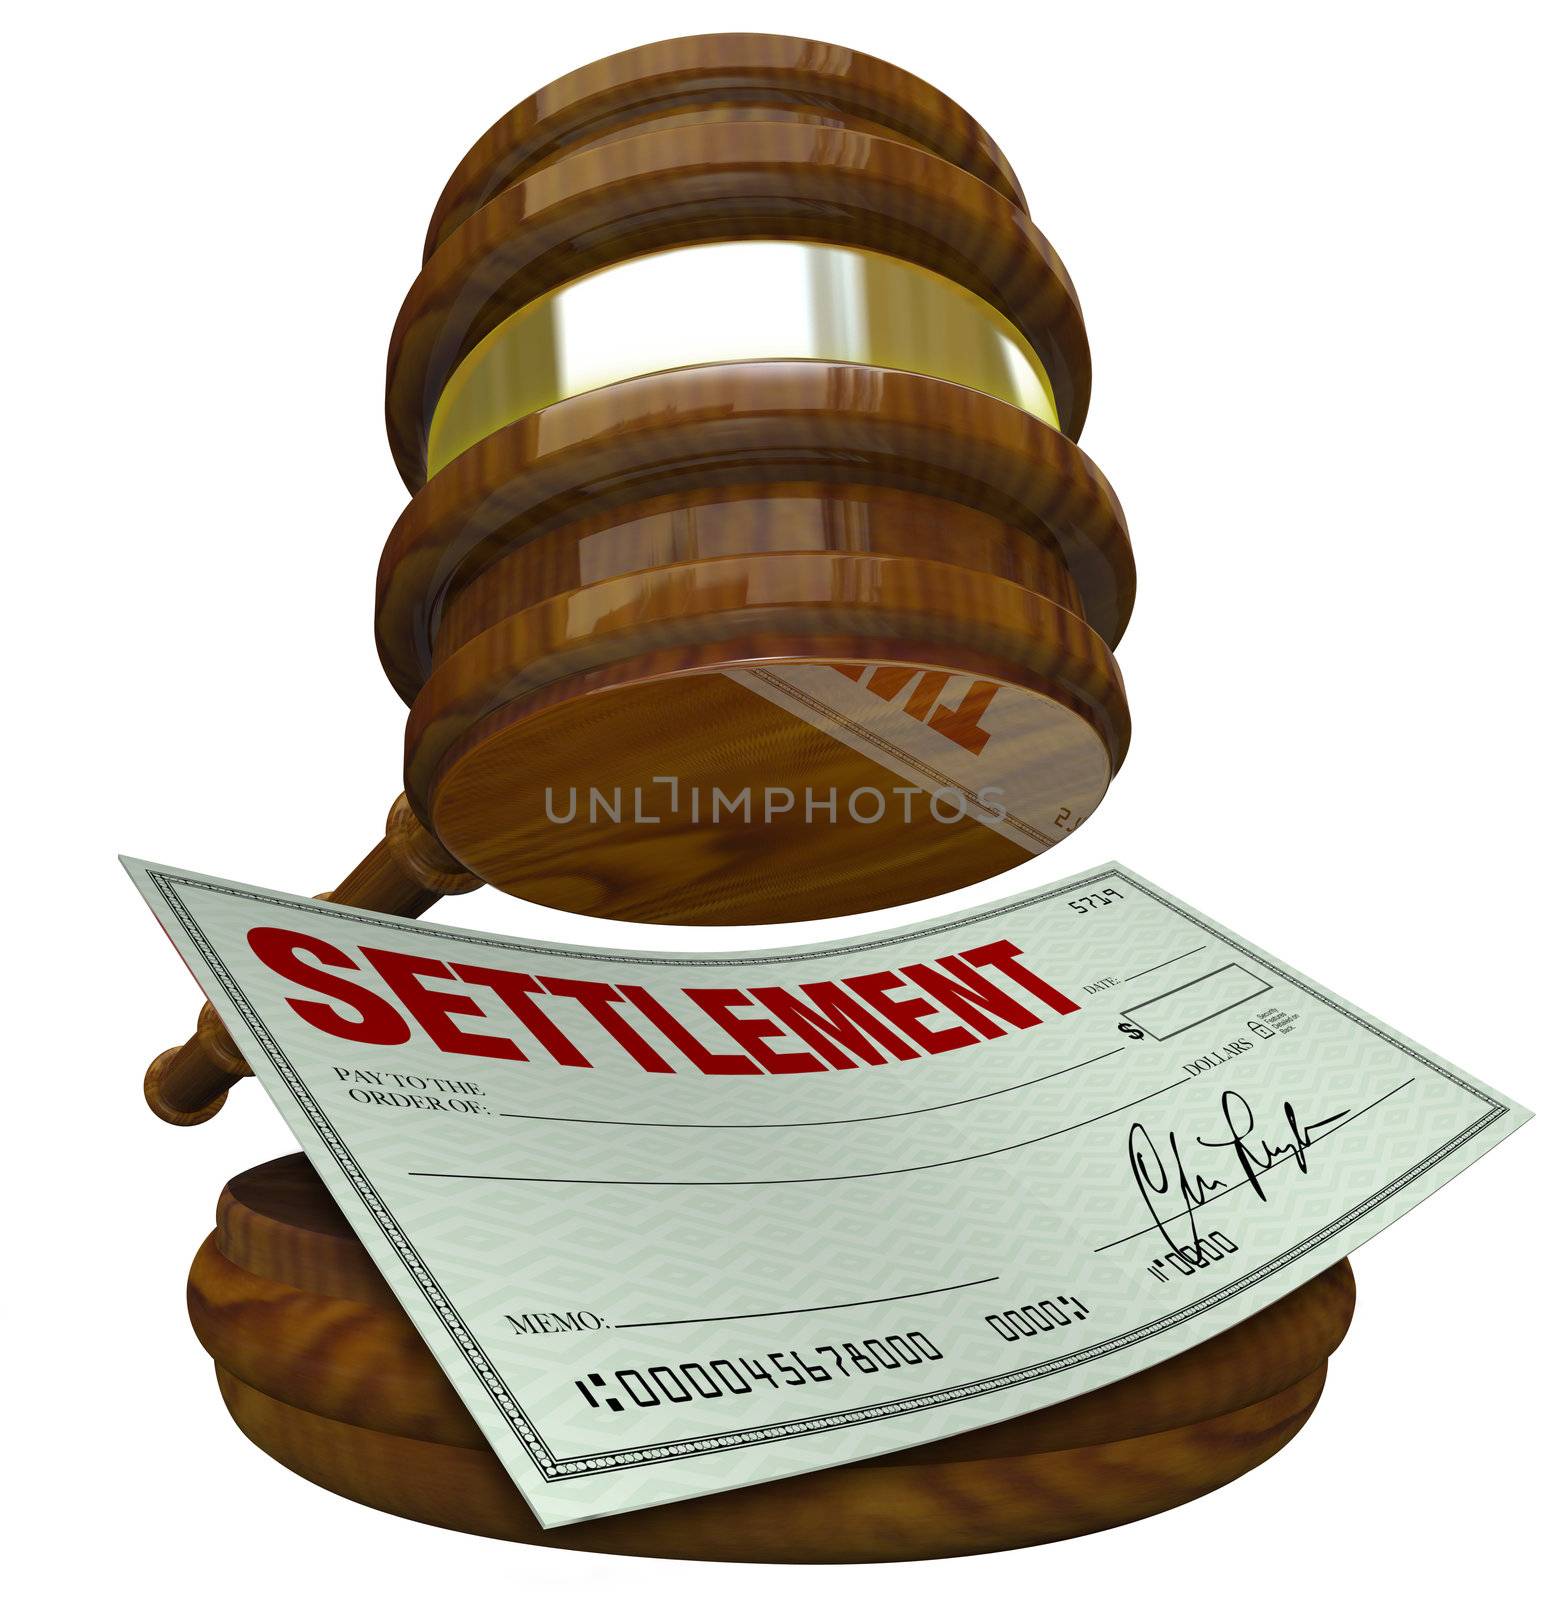 A gavel hovering over a check reading Settlement, illustrating an agreement overseen by the judicial and legal system binding two parties to a cash settlement